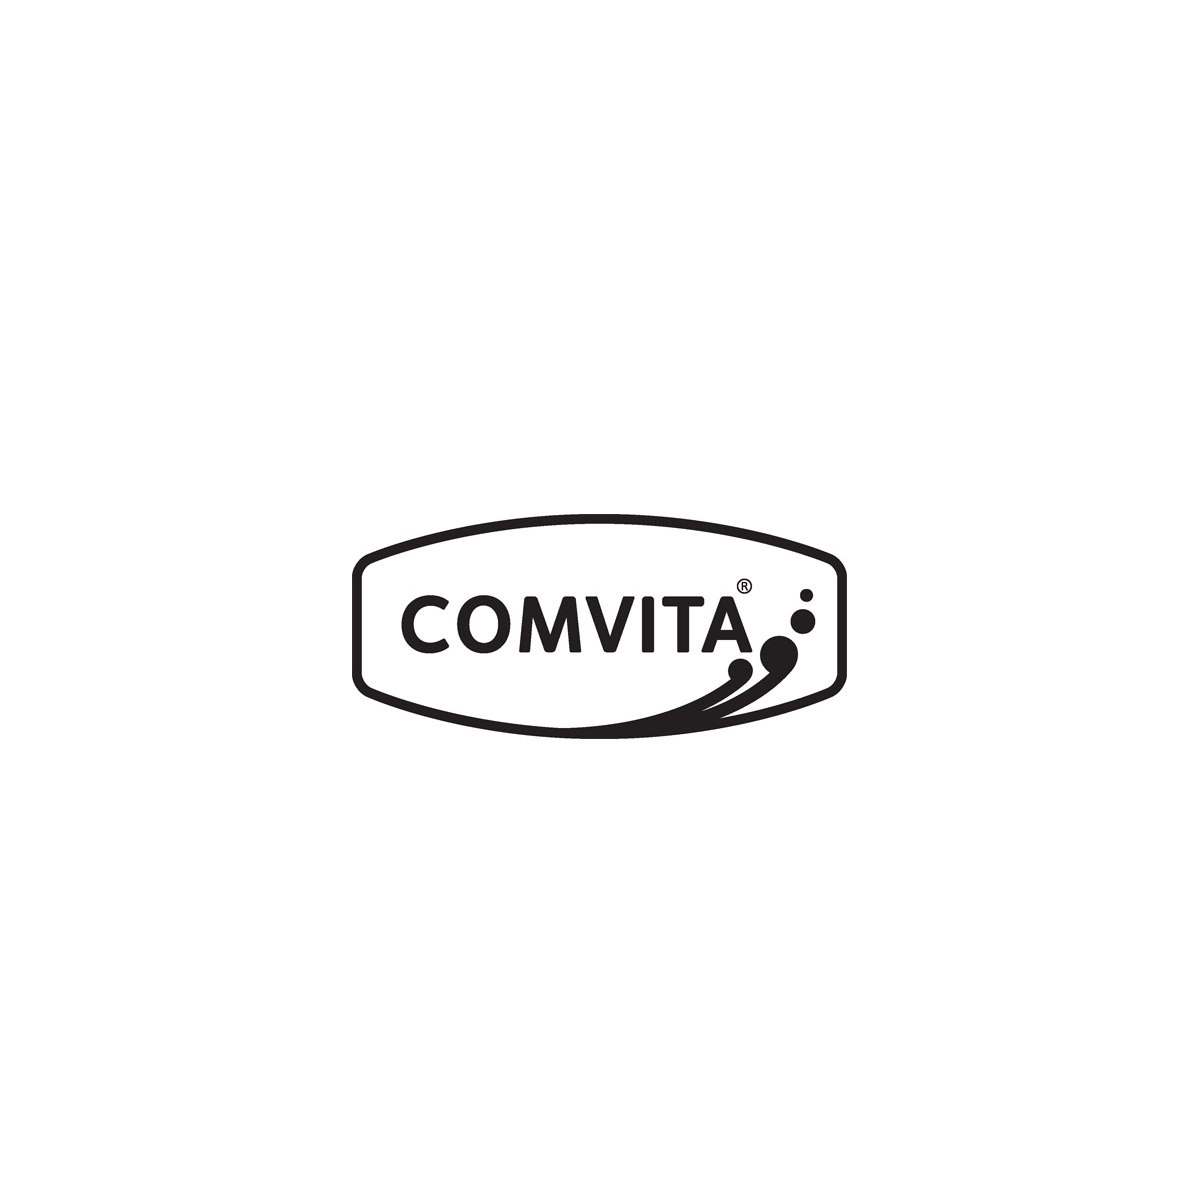 Where to Buy Comvita Products